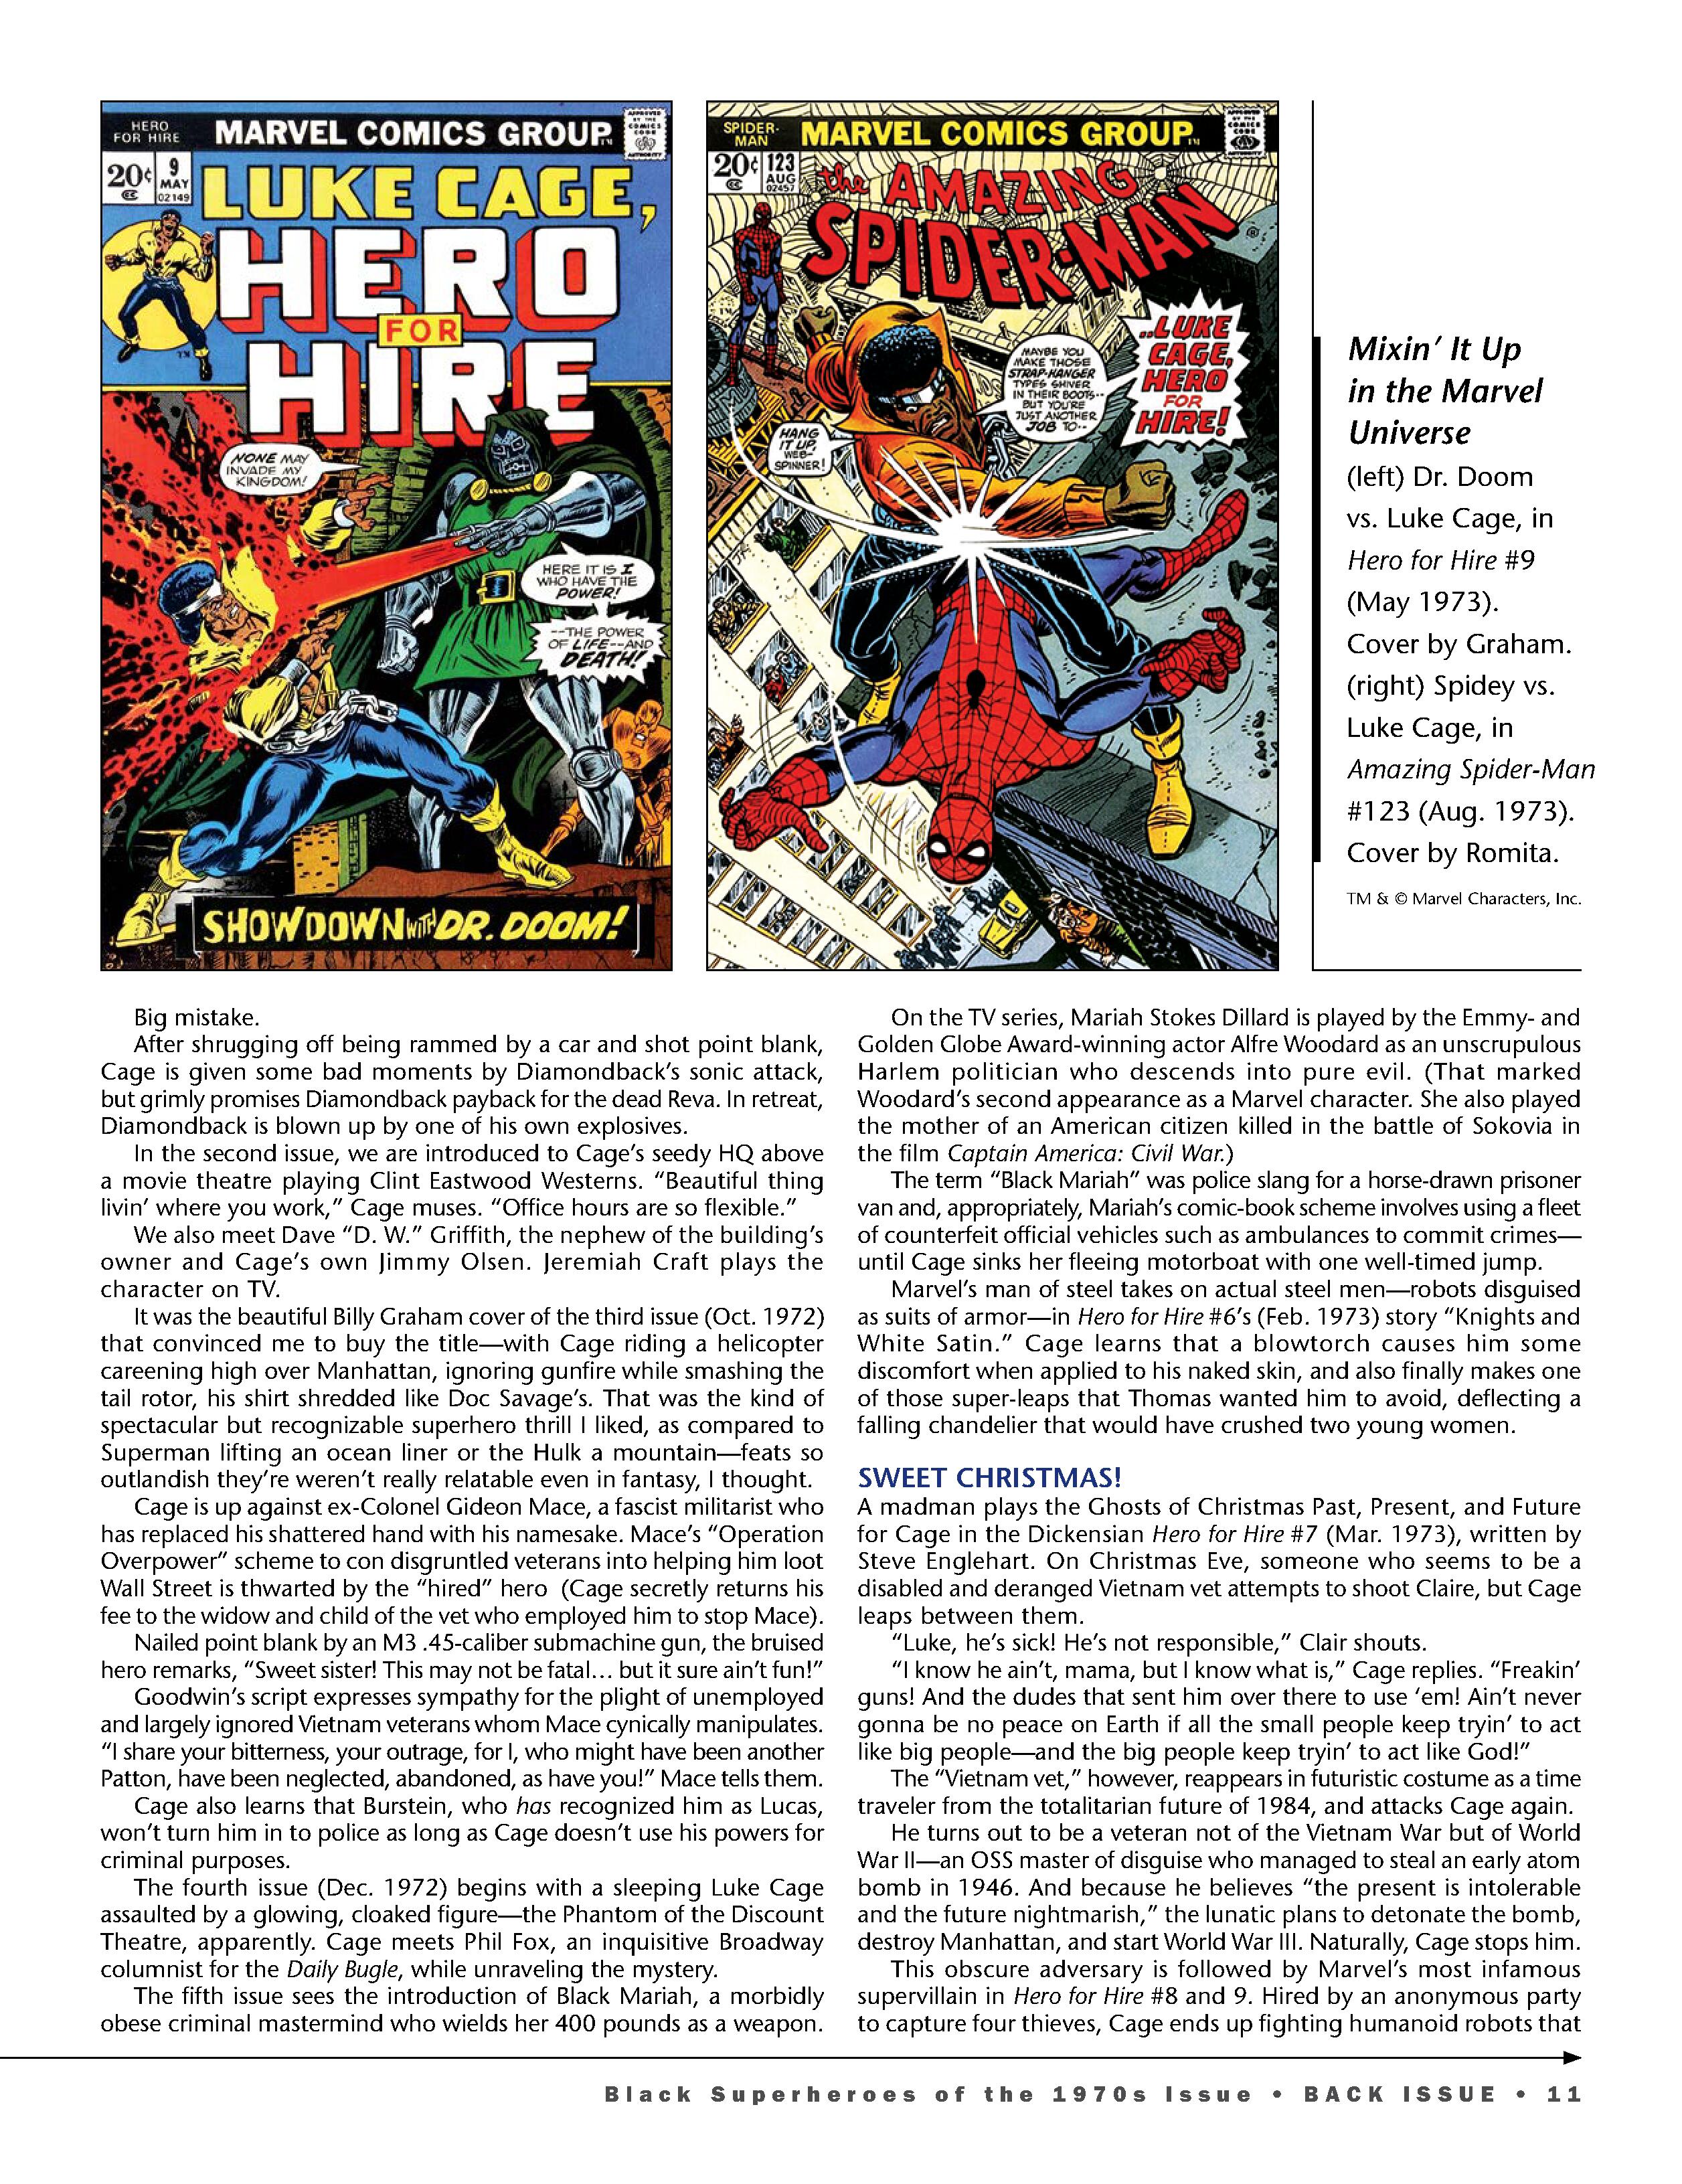 Read online Back Issue comic -  Issue #114 - 13